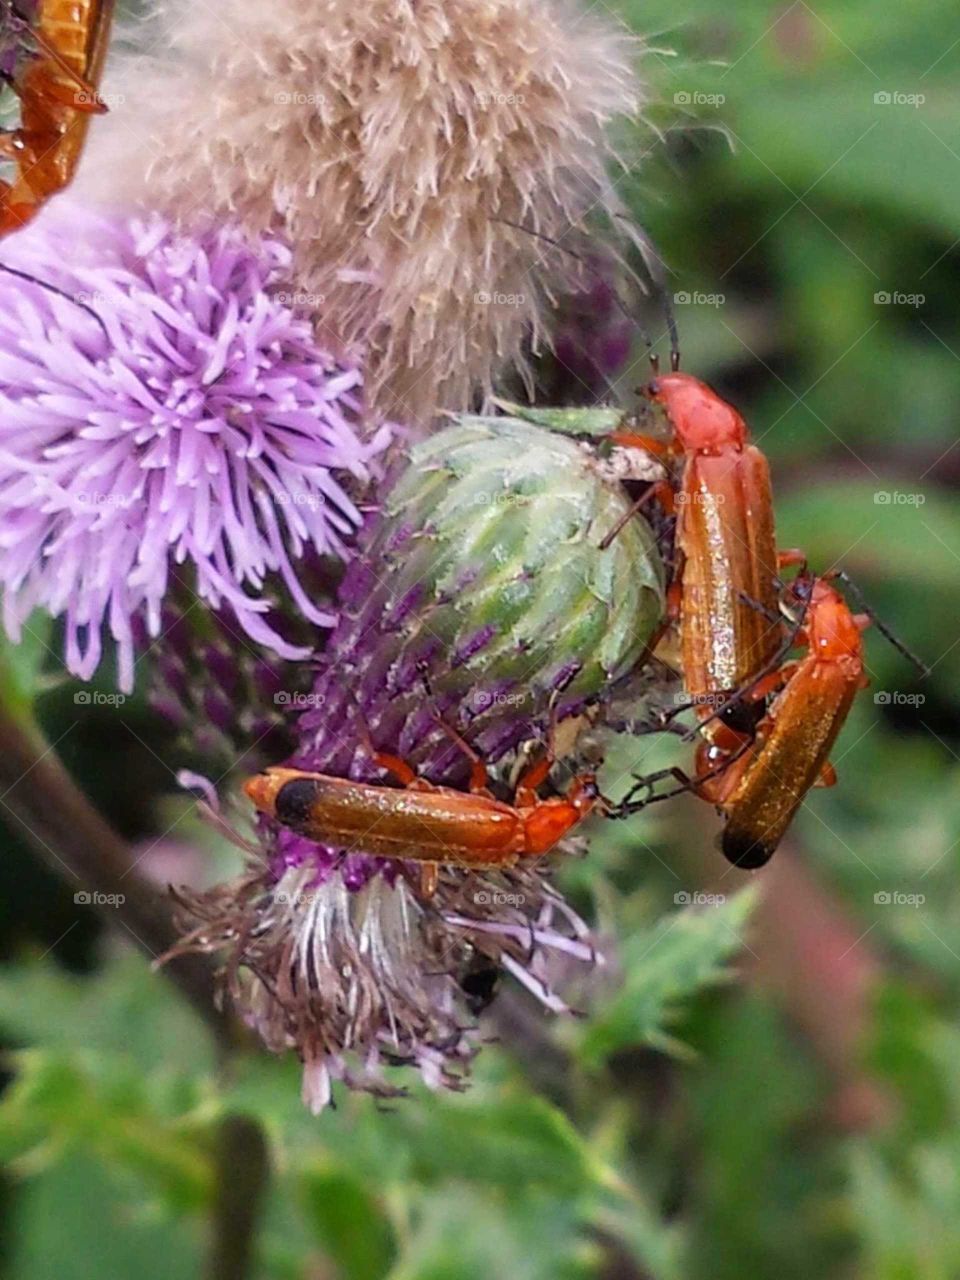 Red Beatles on a thistle flower